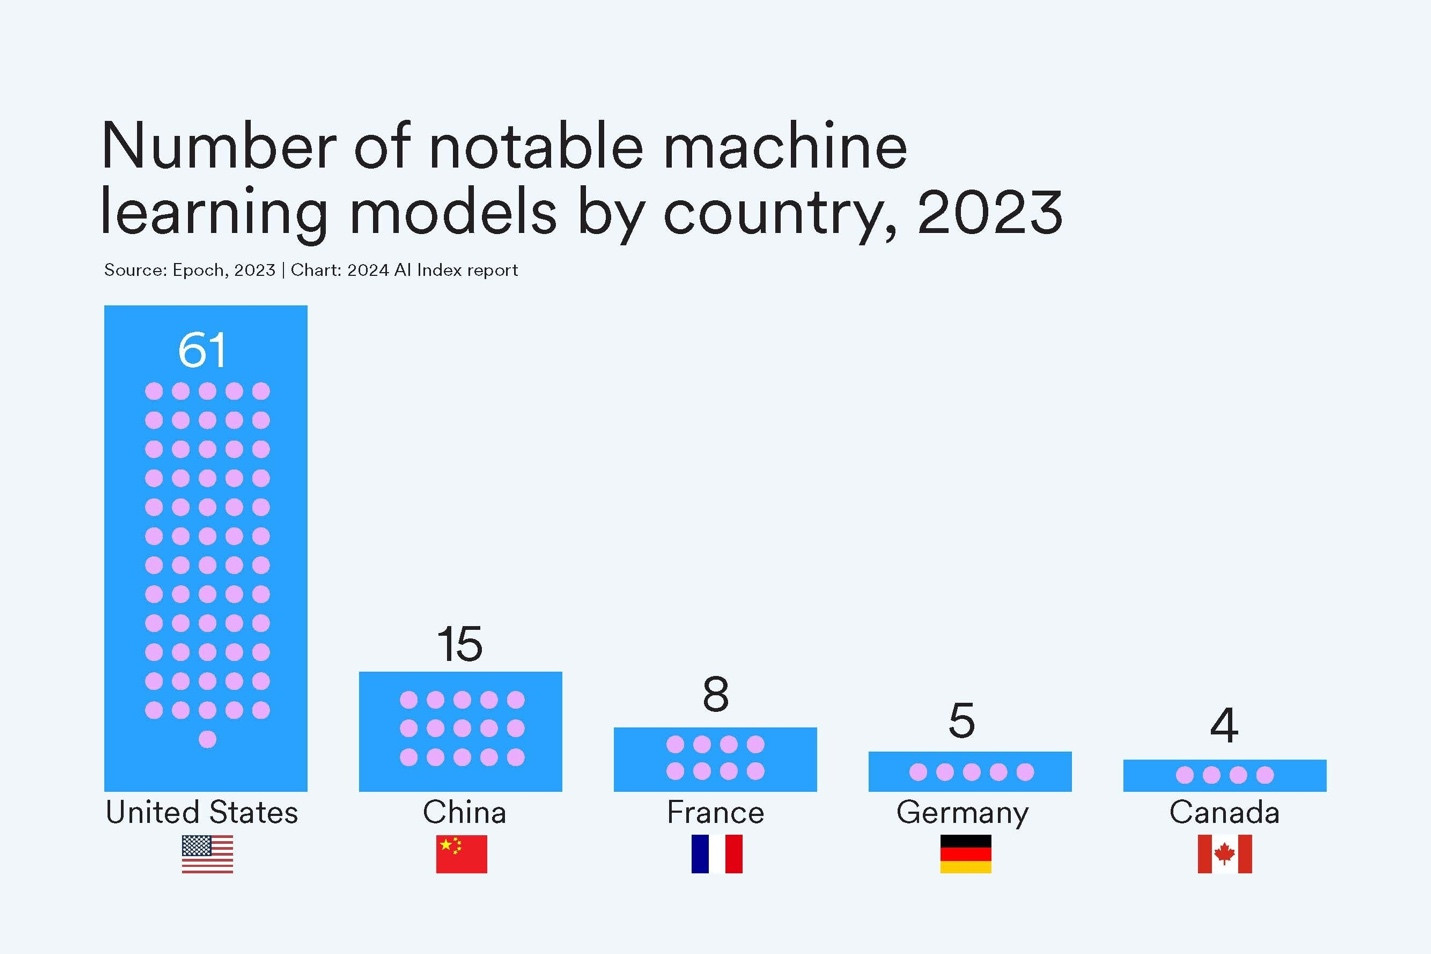 A graph showing the number of notable machine learning models launched by country in 2023